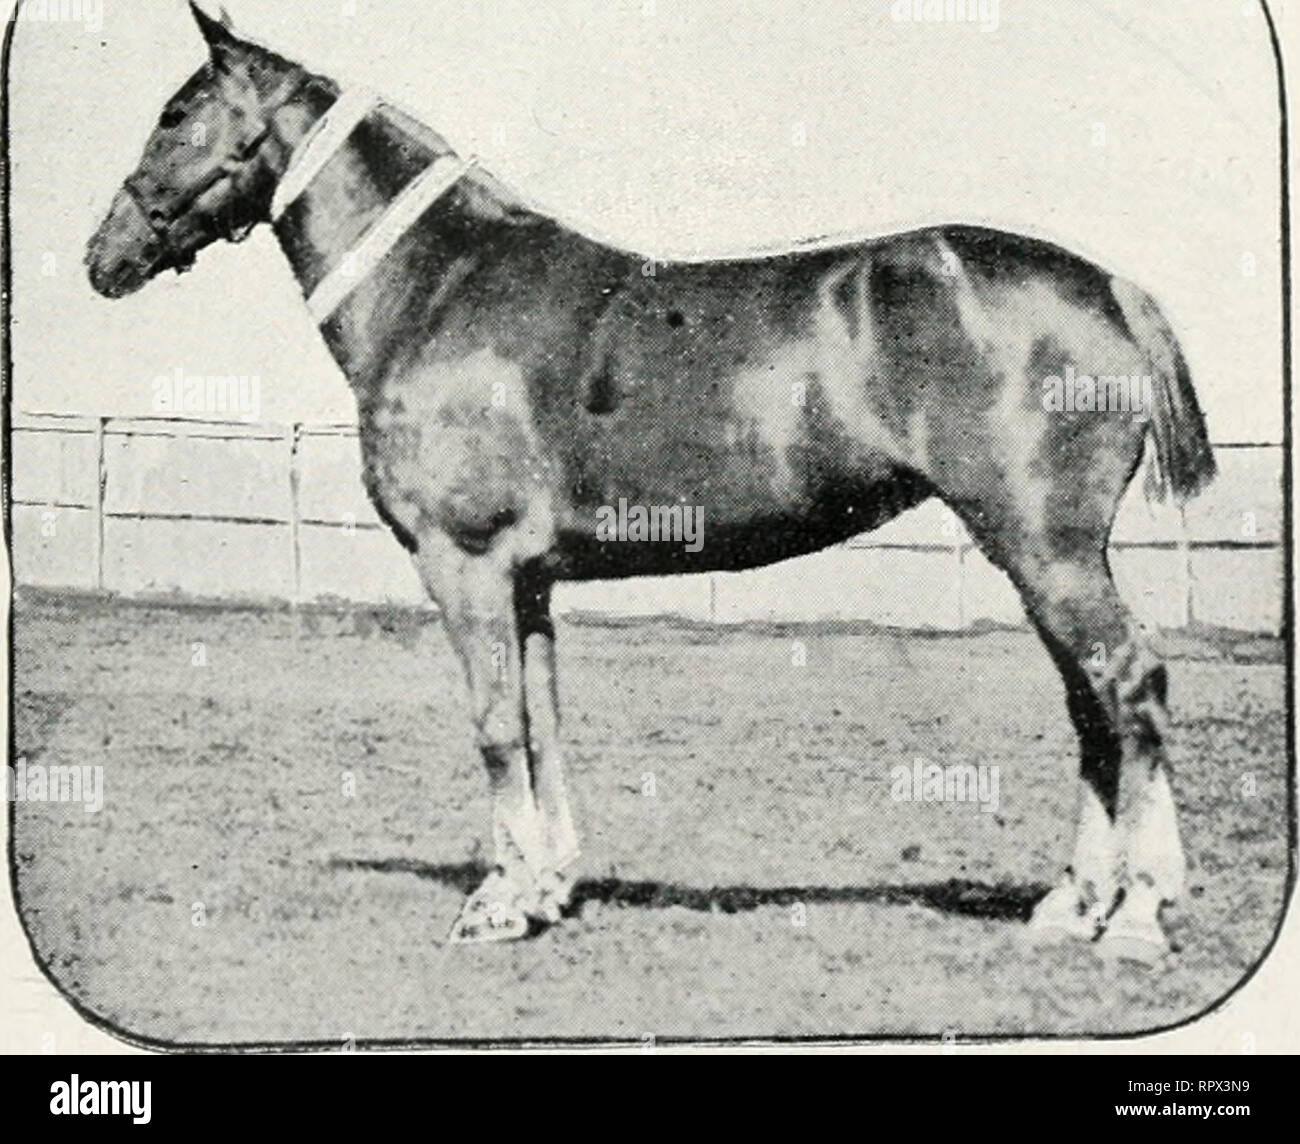 . The agricultural gazette of New South Wales. Agriculture; Agriculture -- Australia New South Wales. Vim. Sire, Detective (imp.); dam, Darwinia (imp.). shows great dash with beautiful action, and a very fast trotter. He won first and champion prize at Sydney Royal Agricultural Society's Show, Vis.—A chestnut mare and a full sister to Vim, and she was bred in Victoria by the late Hon. W, I. Winter Irving, M.L.C.. Vis stands 14.3 hands high, is strong enough to pull a spring cart or hansom cab, and is a. Vis, pure-bred cob mare. Sire, Detective (imp. i; dam, Darwinia (imp,). very fast mare in h Stock Photo